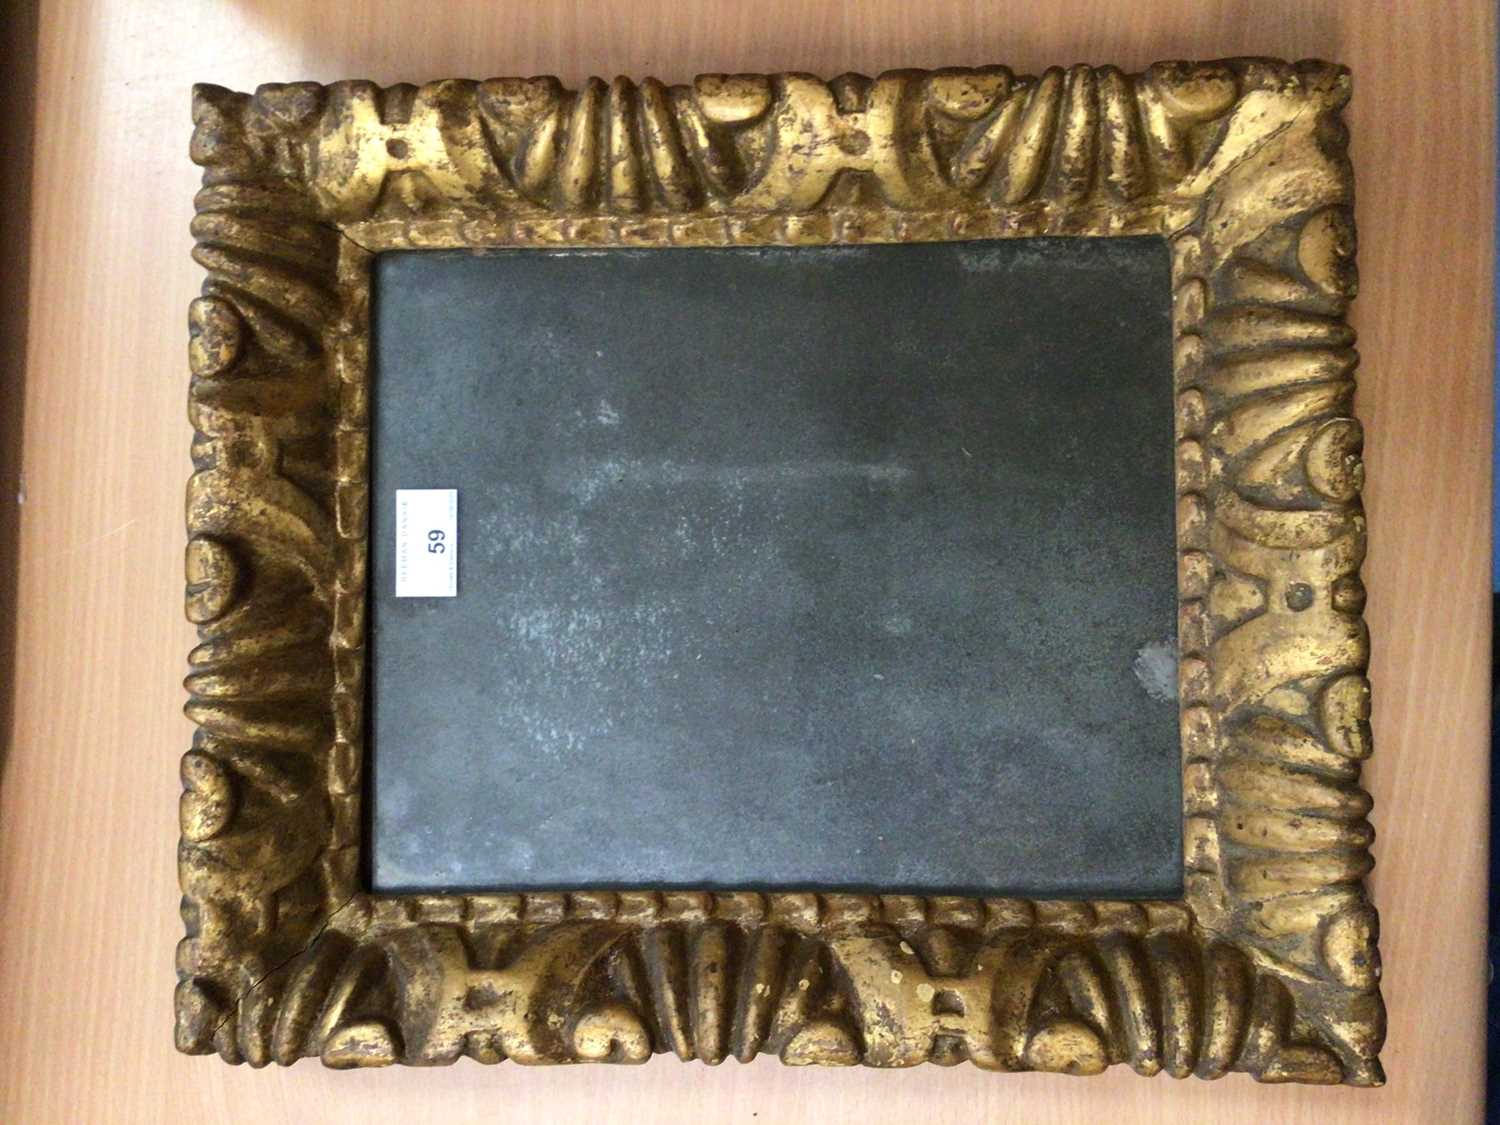 Lot 59 - Good early 19th century gilt framed wall mirror with shell formed borders, 39cm x 33cm overall